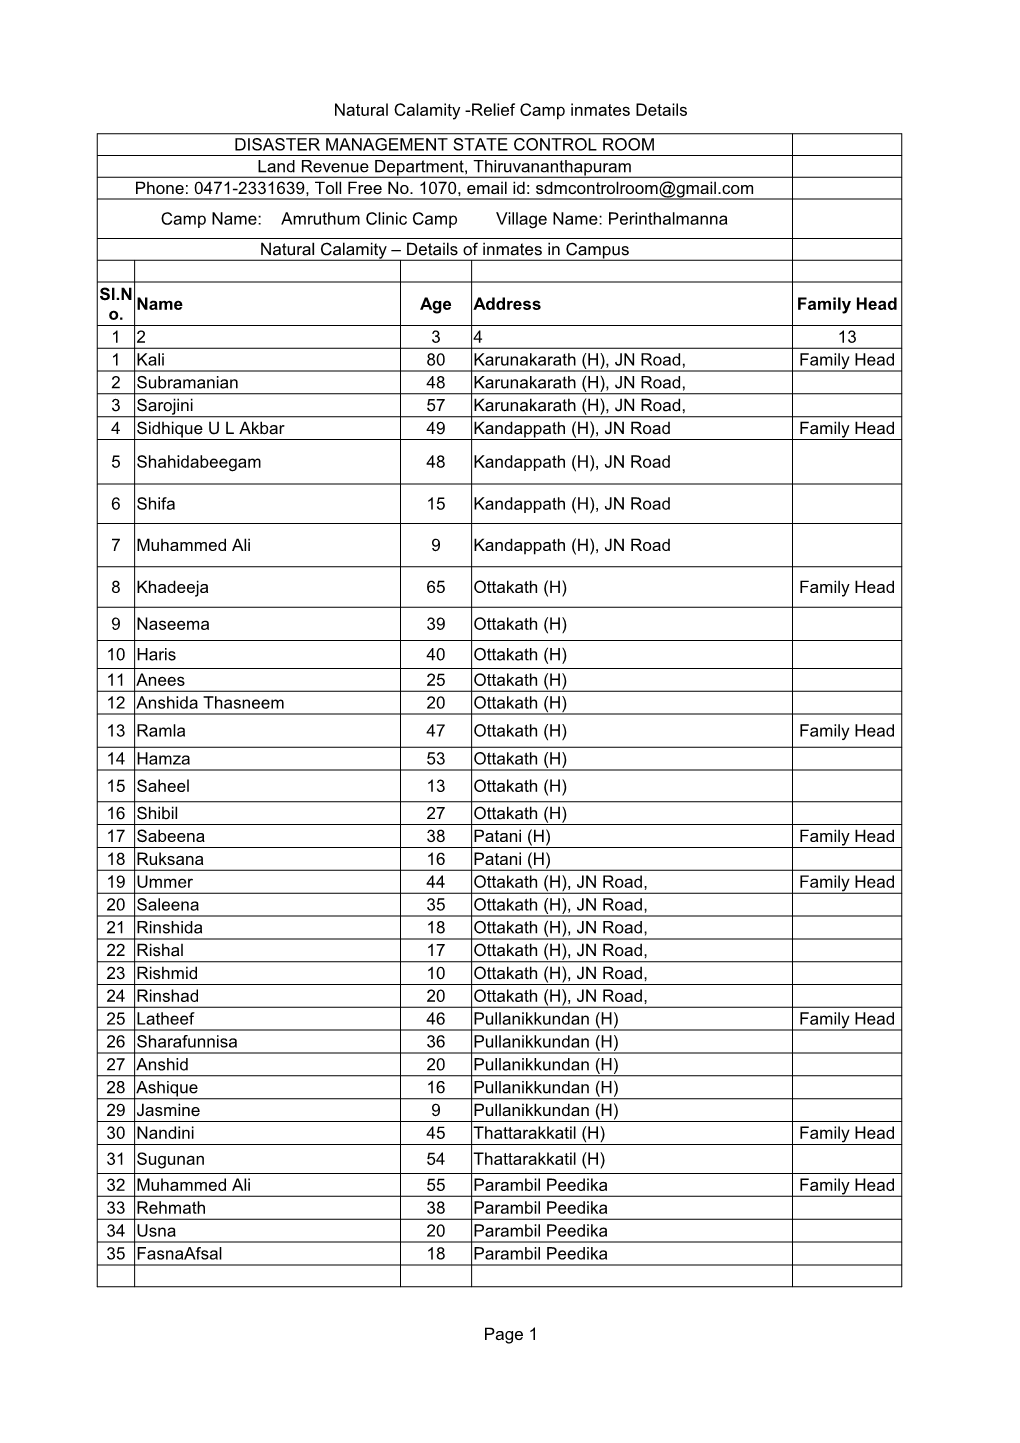 Natural Calamity -Relief Camp Inmates Details Page 1 DISASTER